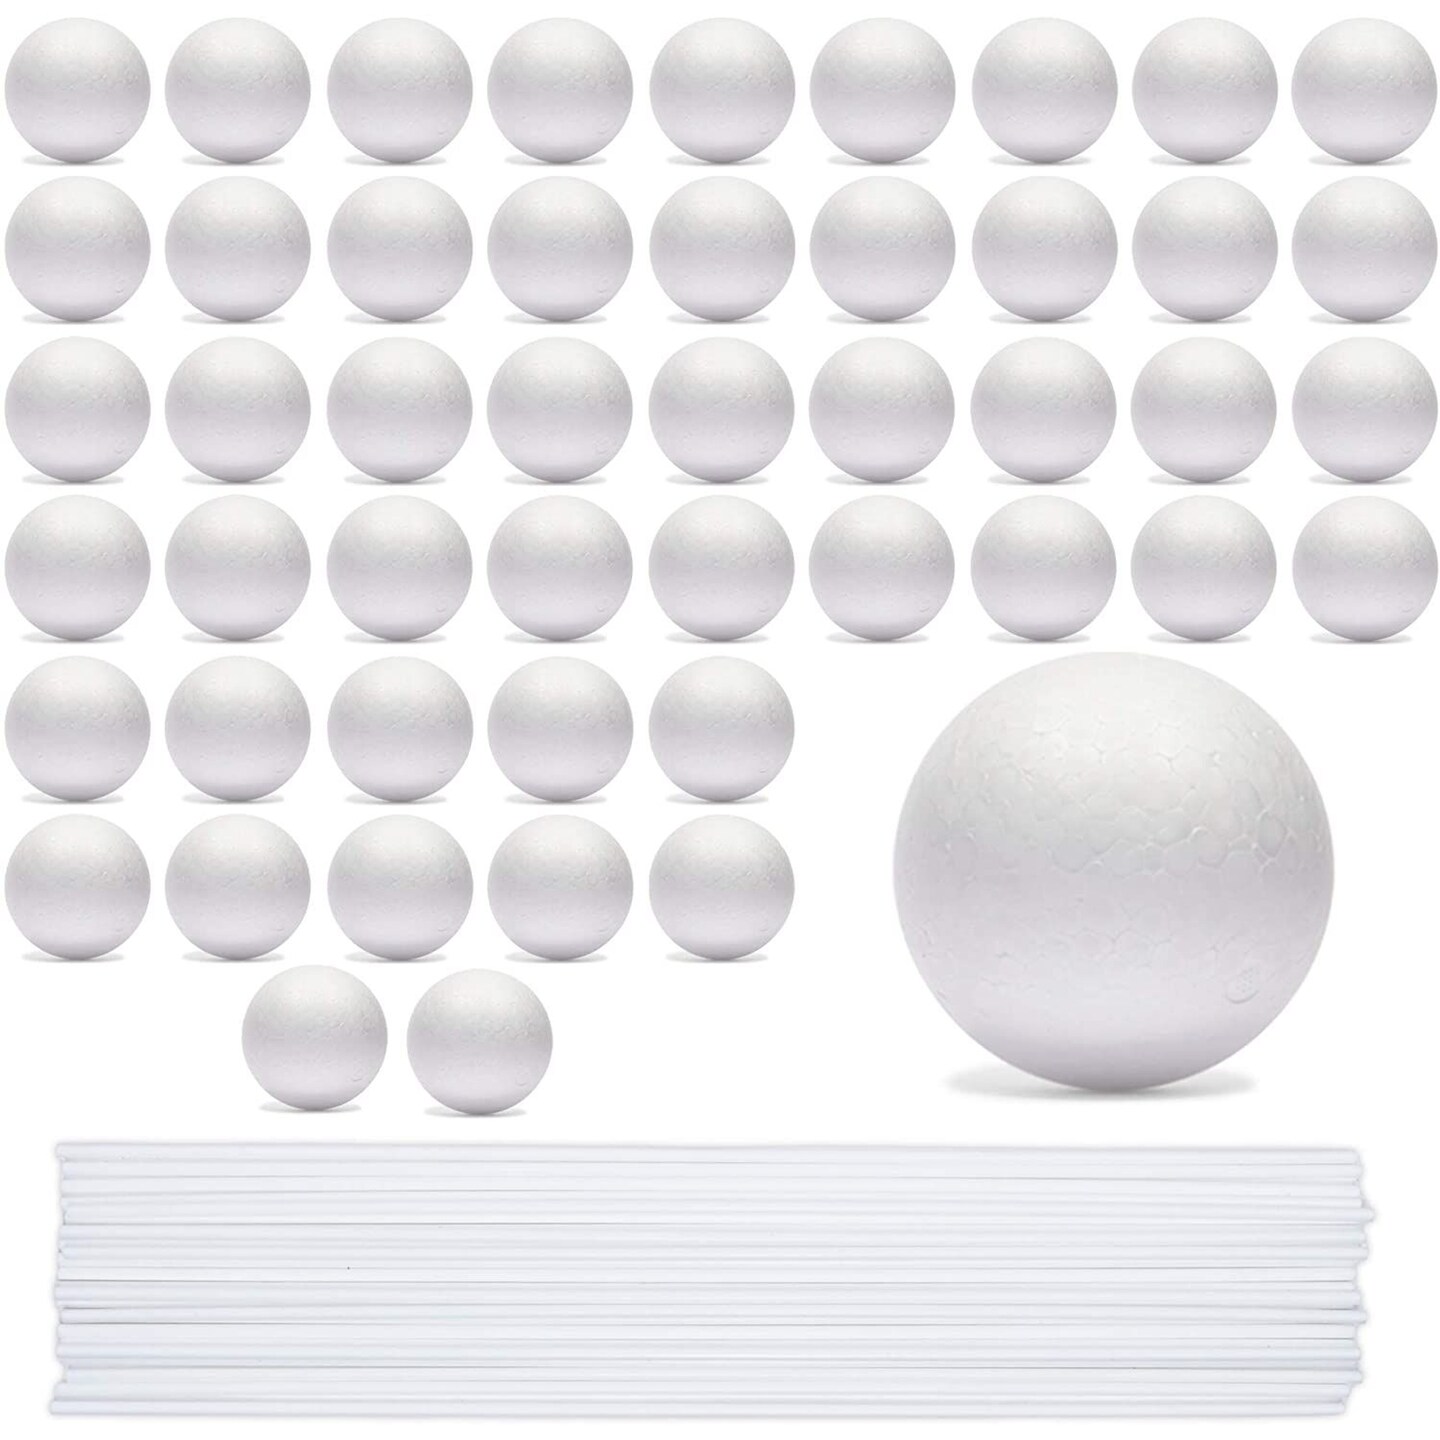 4 Inch Foam Balls for Crafts - 12 Pack Round White Polystyrene